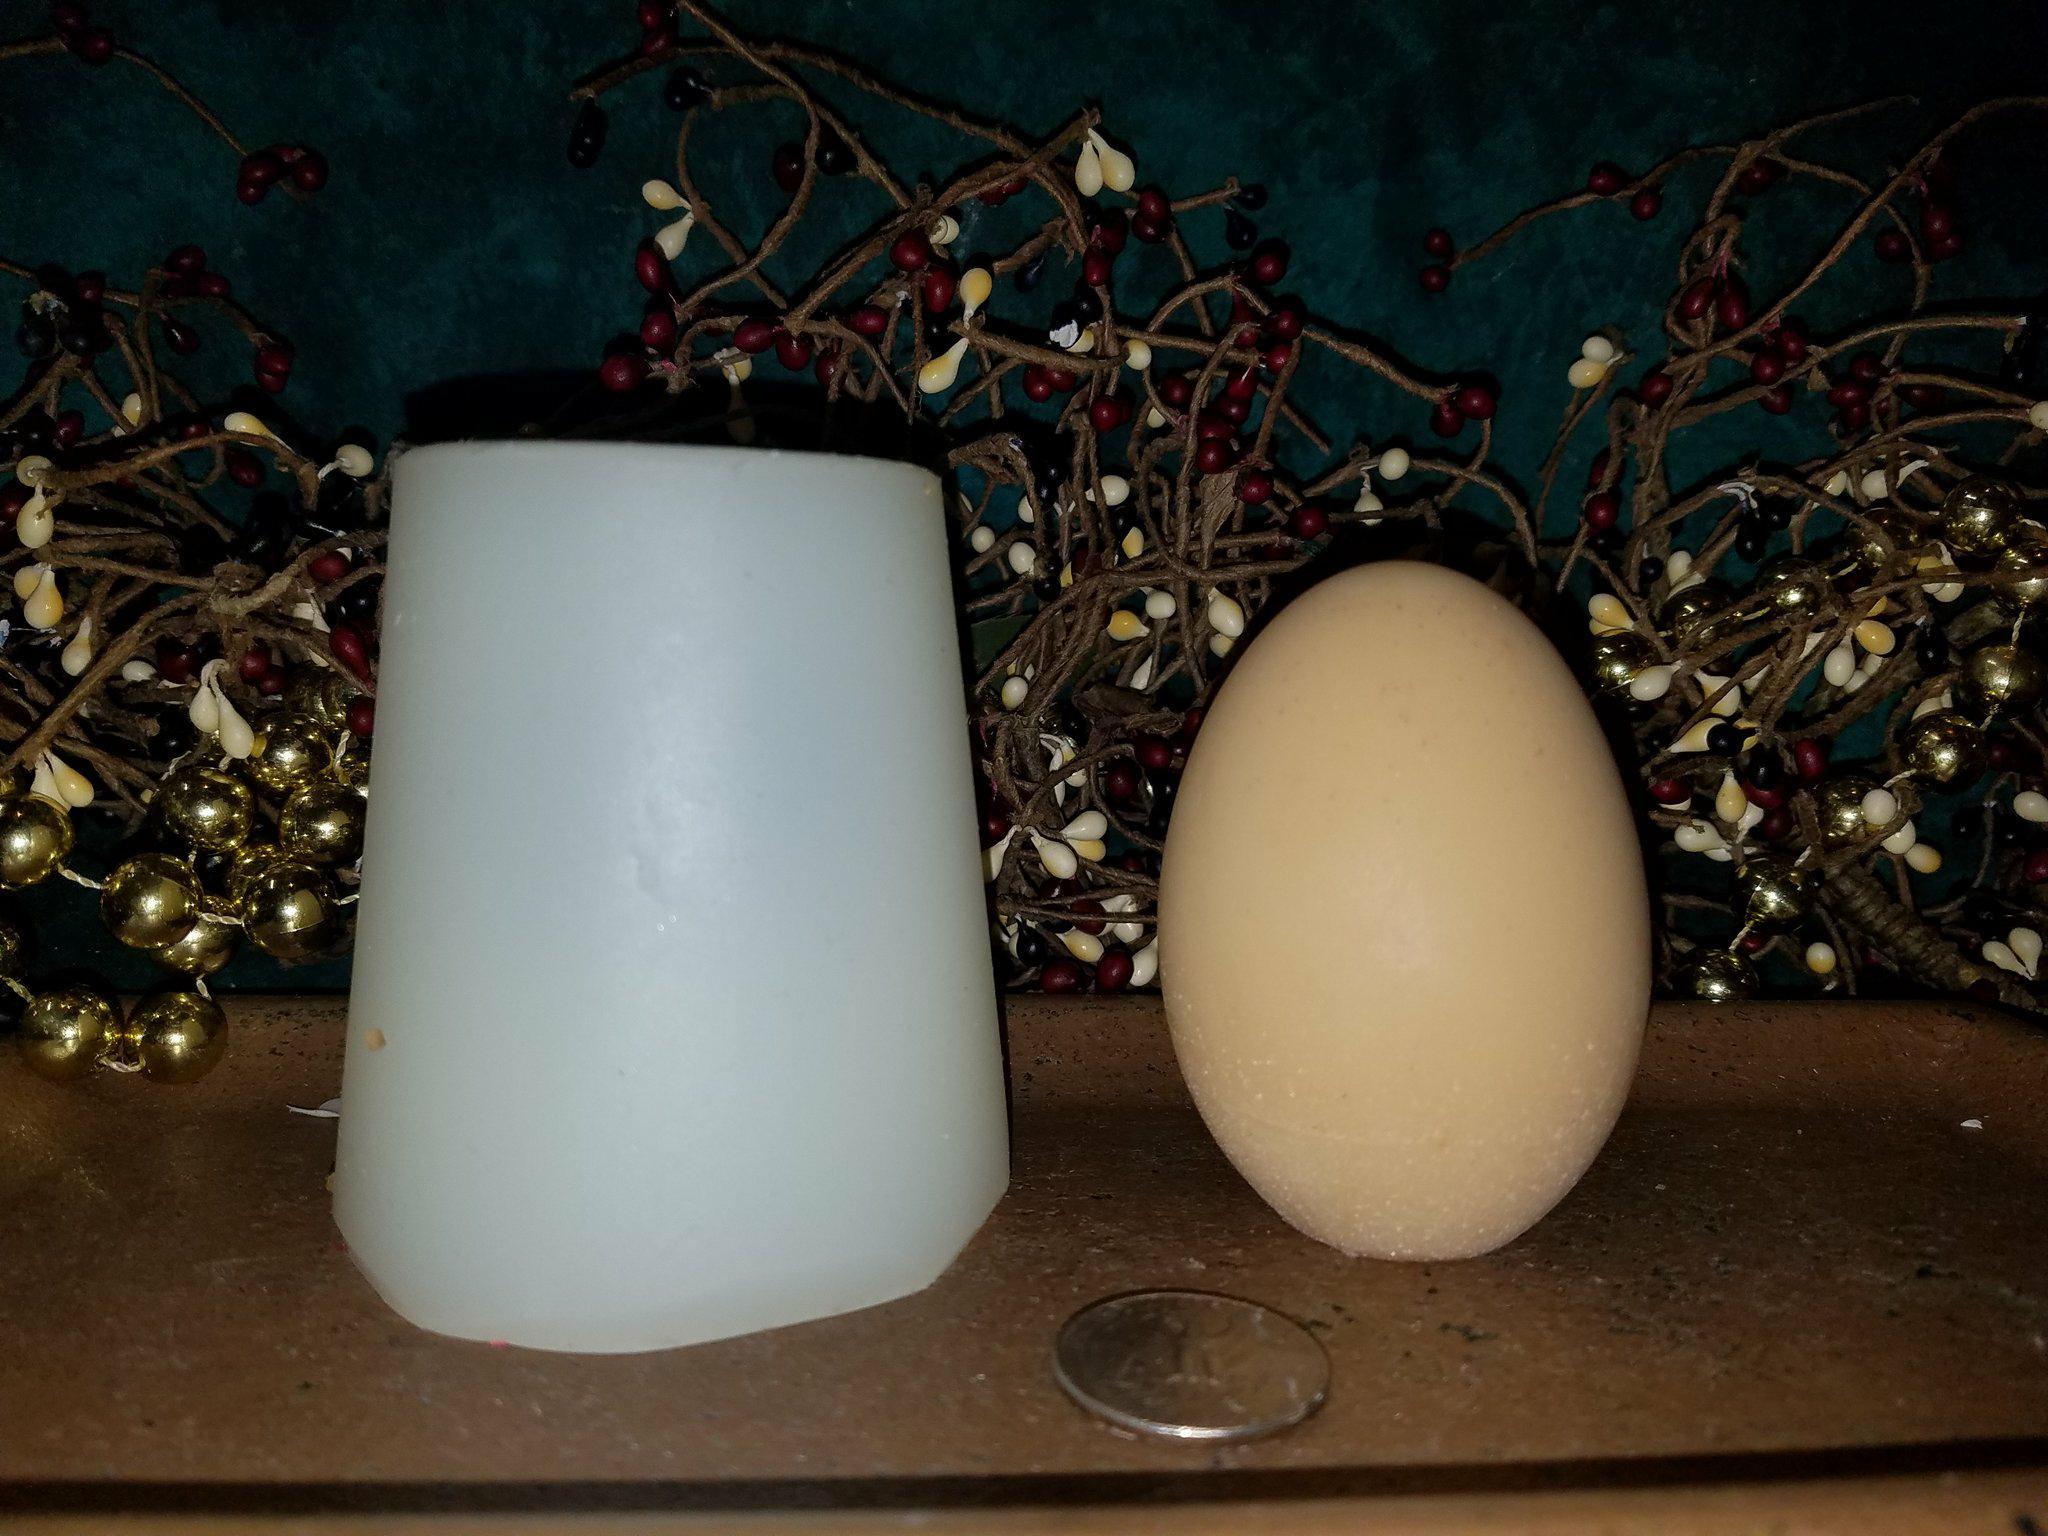 https://www.vanyulay.com/wp-content/uploads/2018/03/Large-Egg-Silicone-Mold-7036-1.jpg